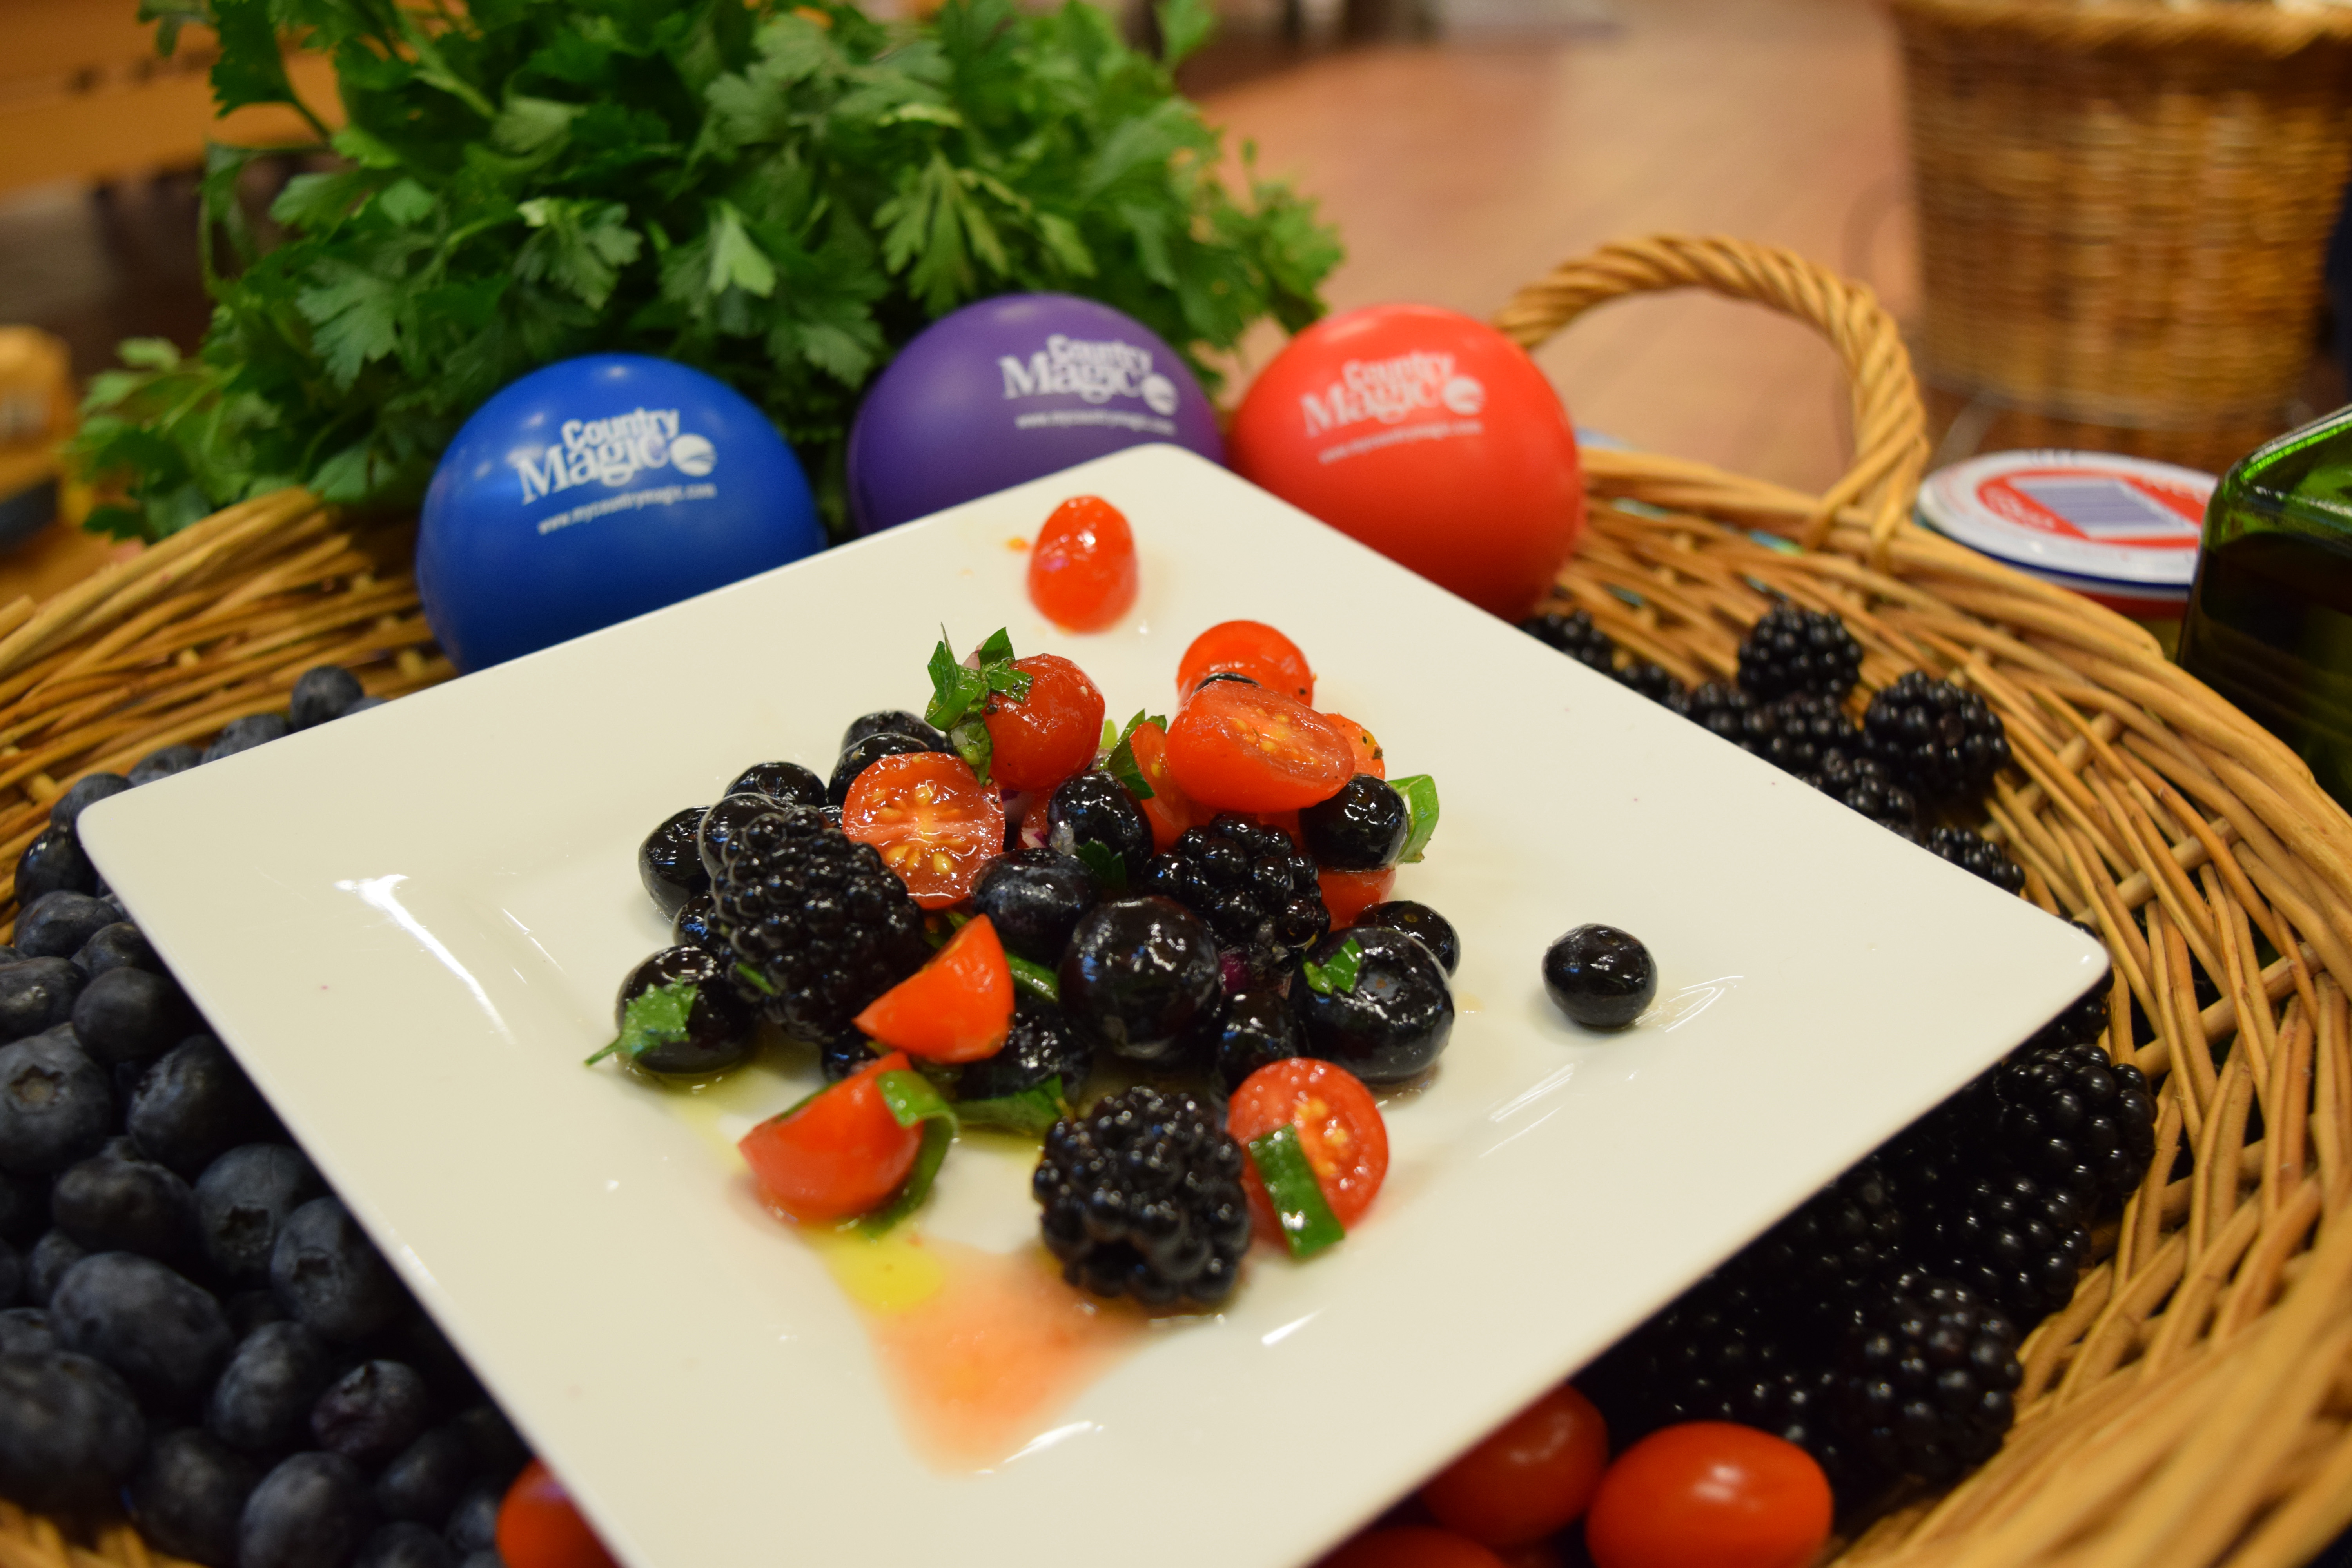 Country Magic summer berry salad